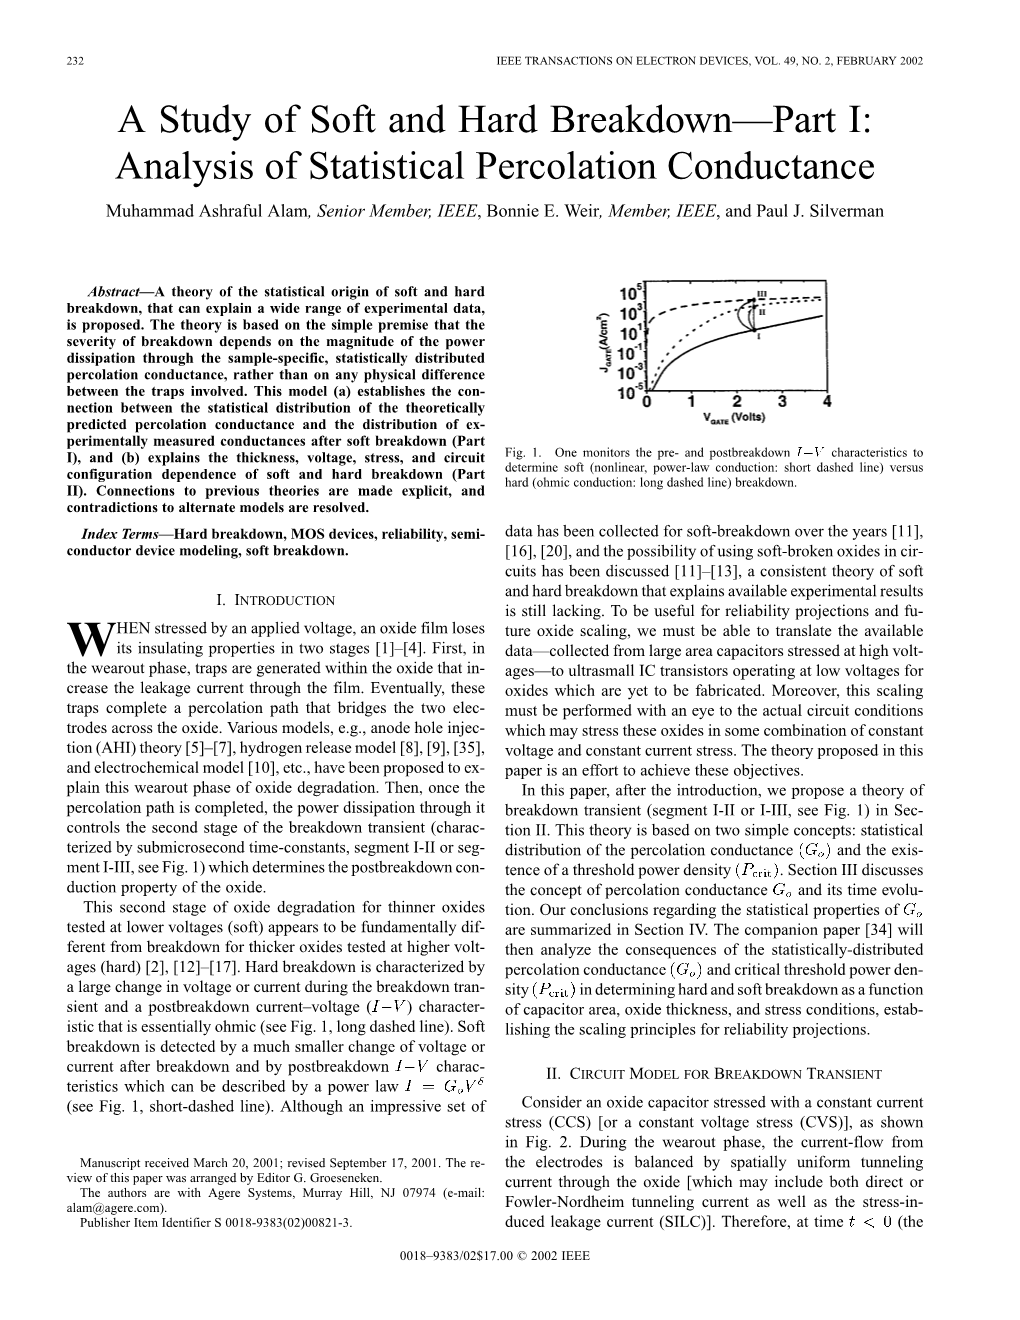 A Study of Soft and Hard Breakdown. I. Analysis of Statistical Percolation Conductance